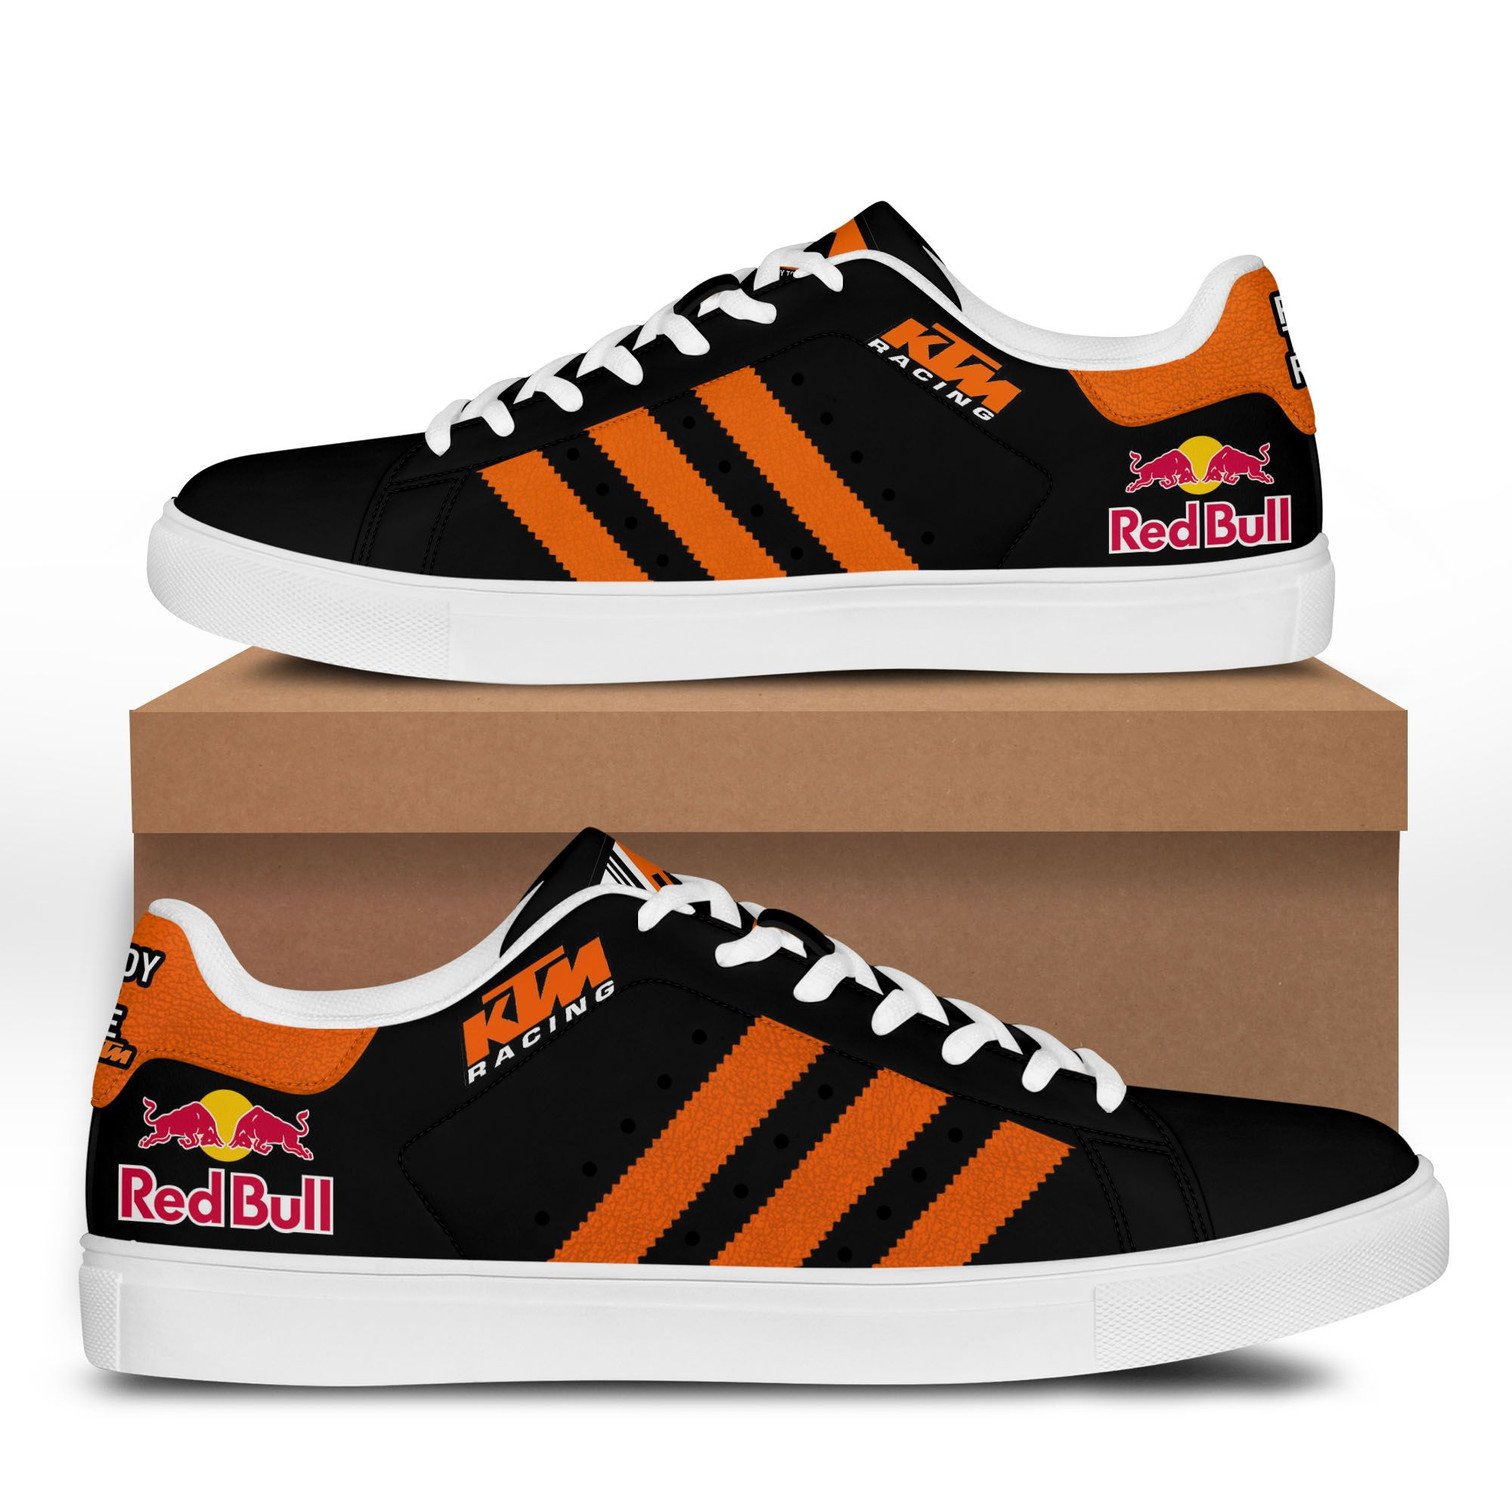 NEW KTM Racing Redbull Stan Smith Sneaker shoes 3